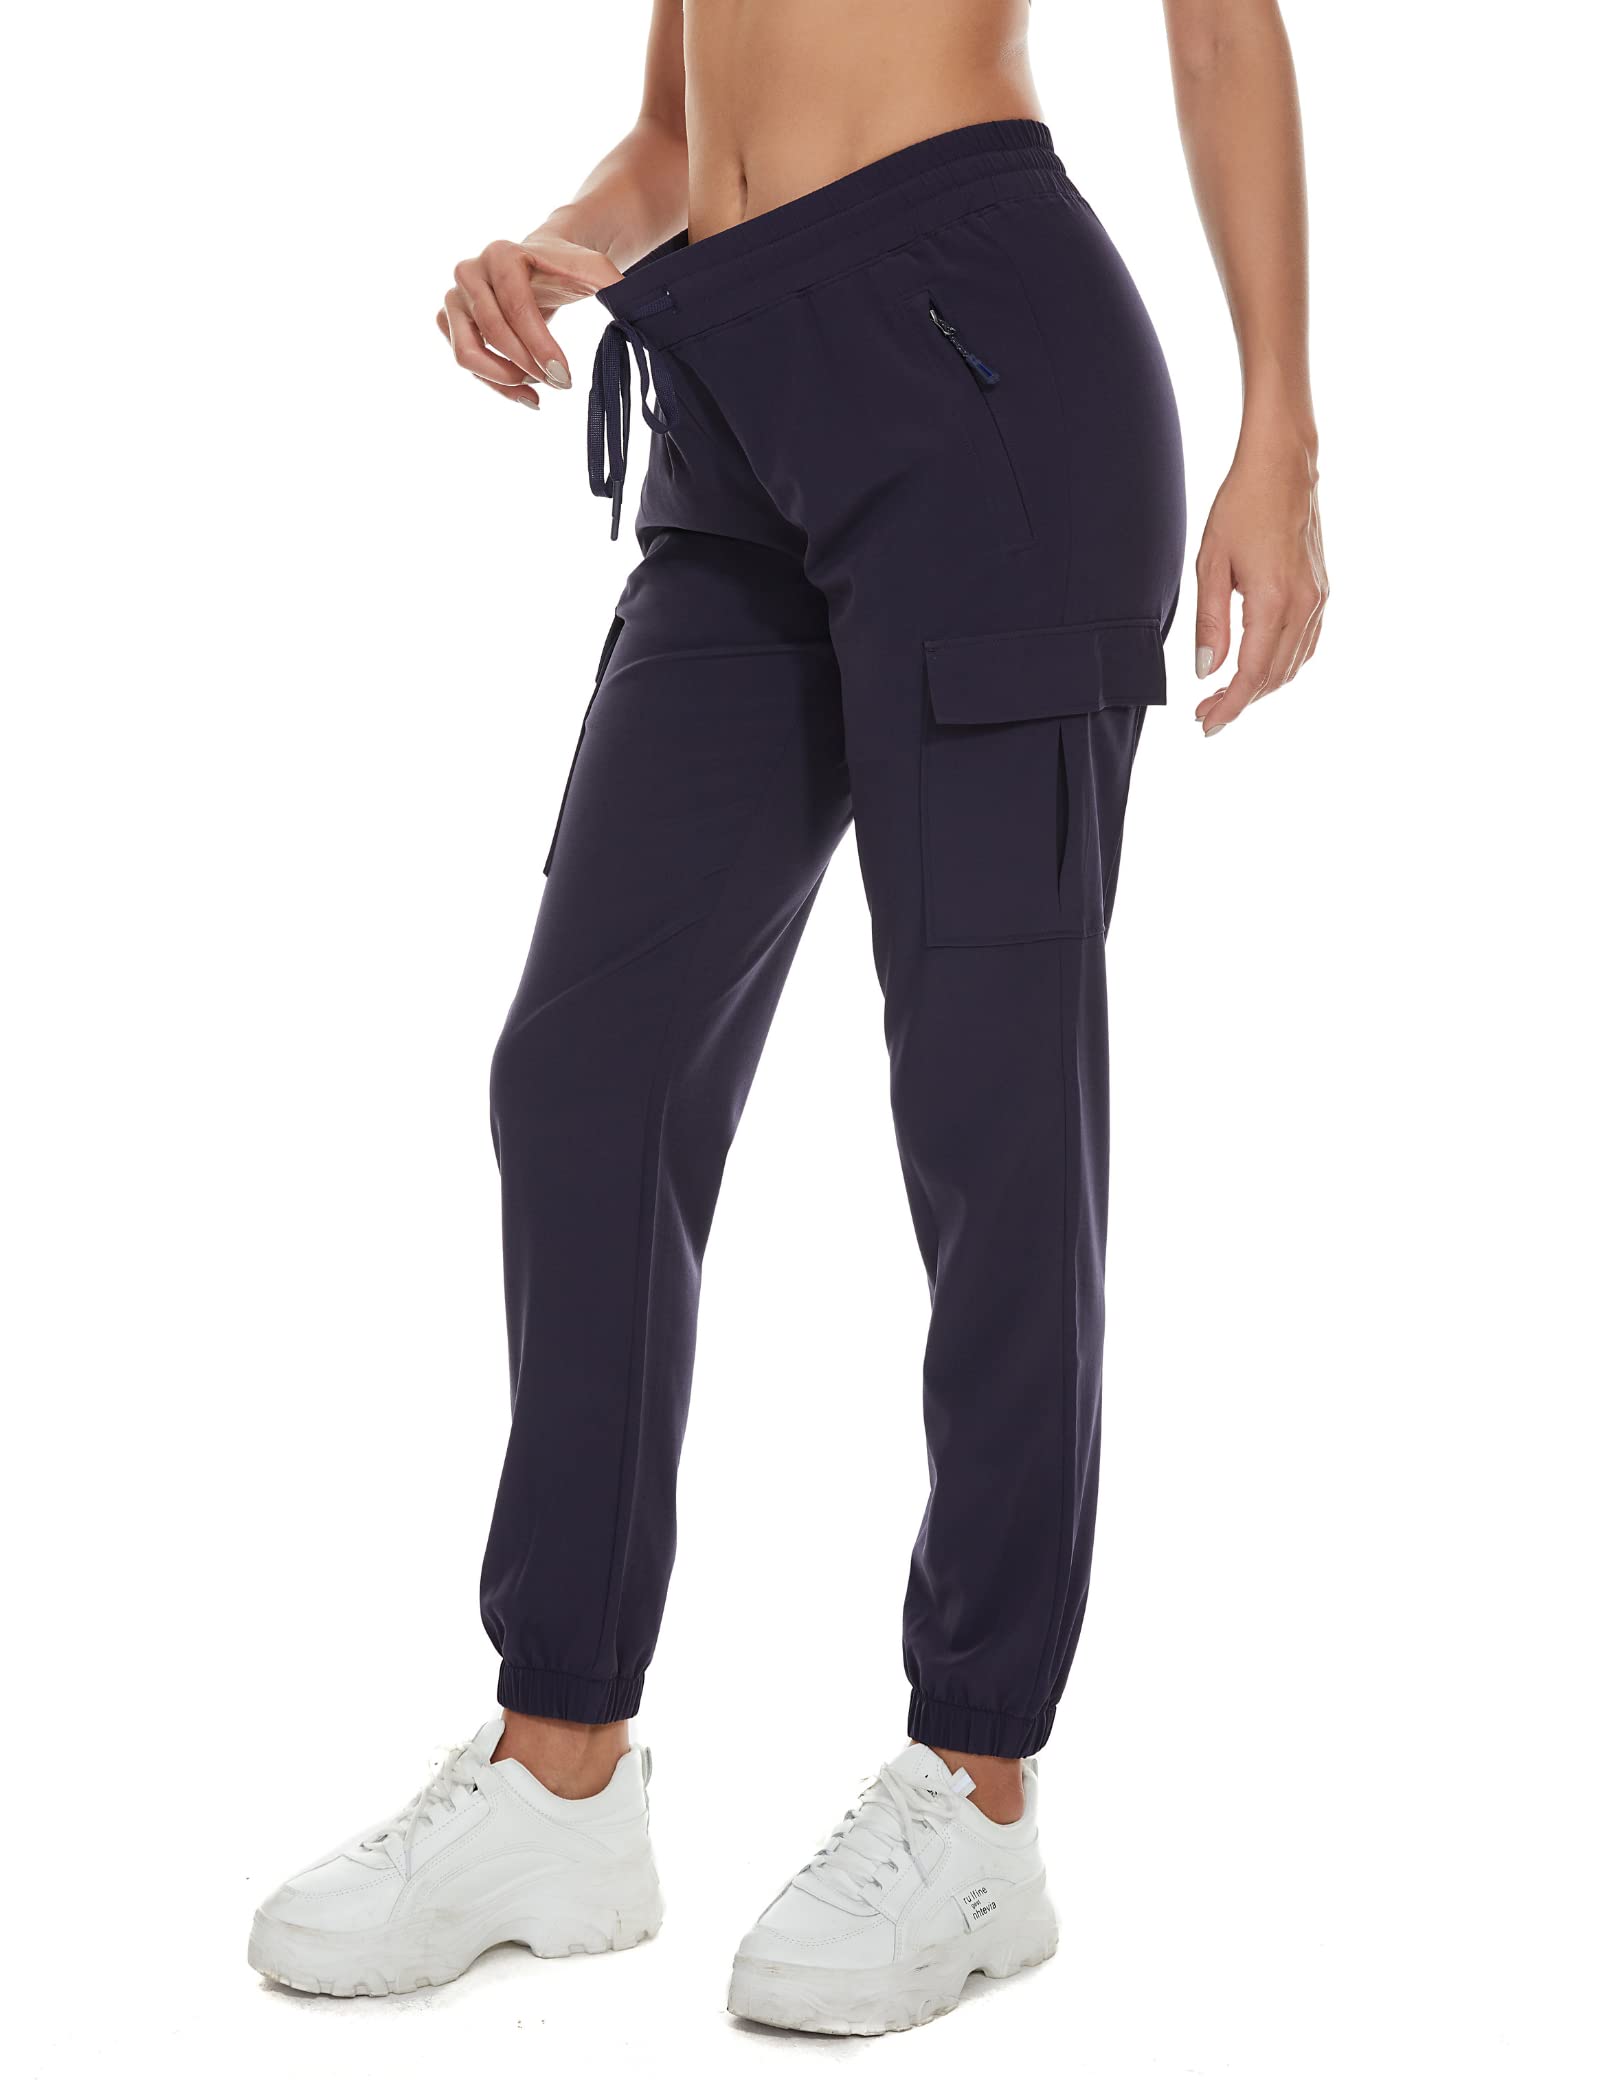 Arunlluta Hiking Pants Women Lightweight Cargo Pants Quick Dry Joggers For  Women With Pockets Water-Resistant Travel Pants Navy